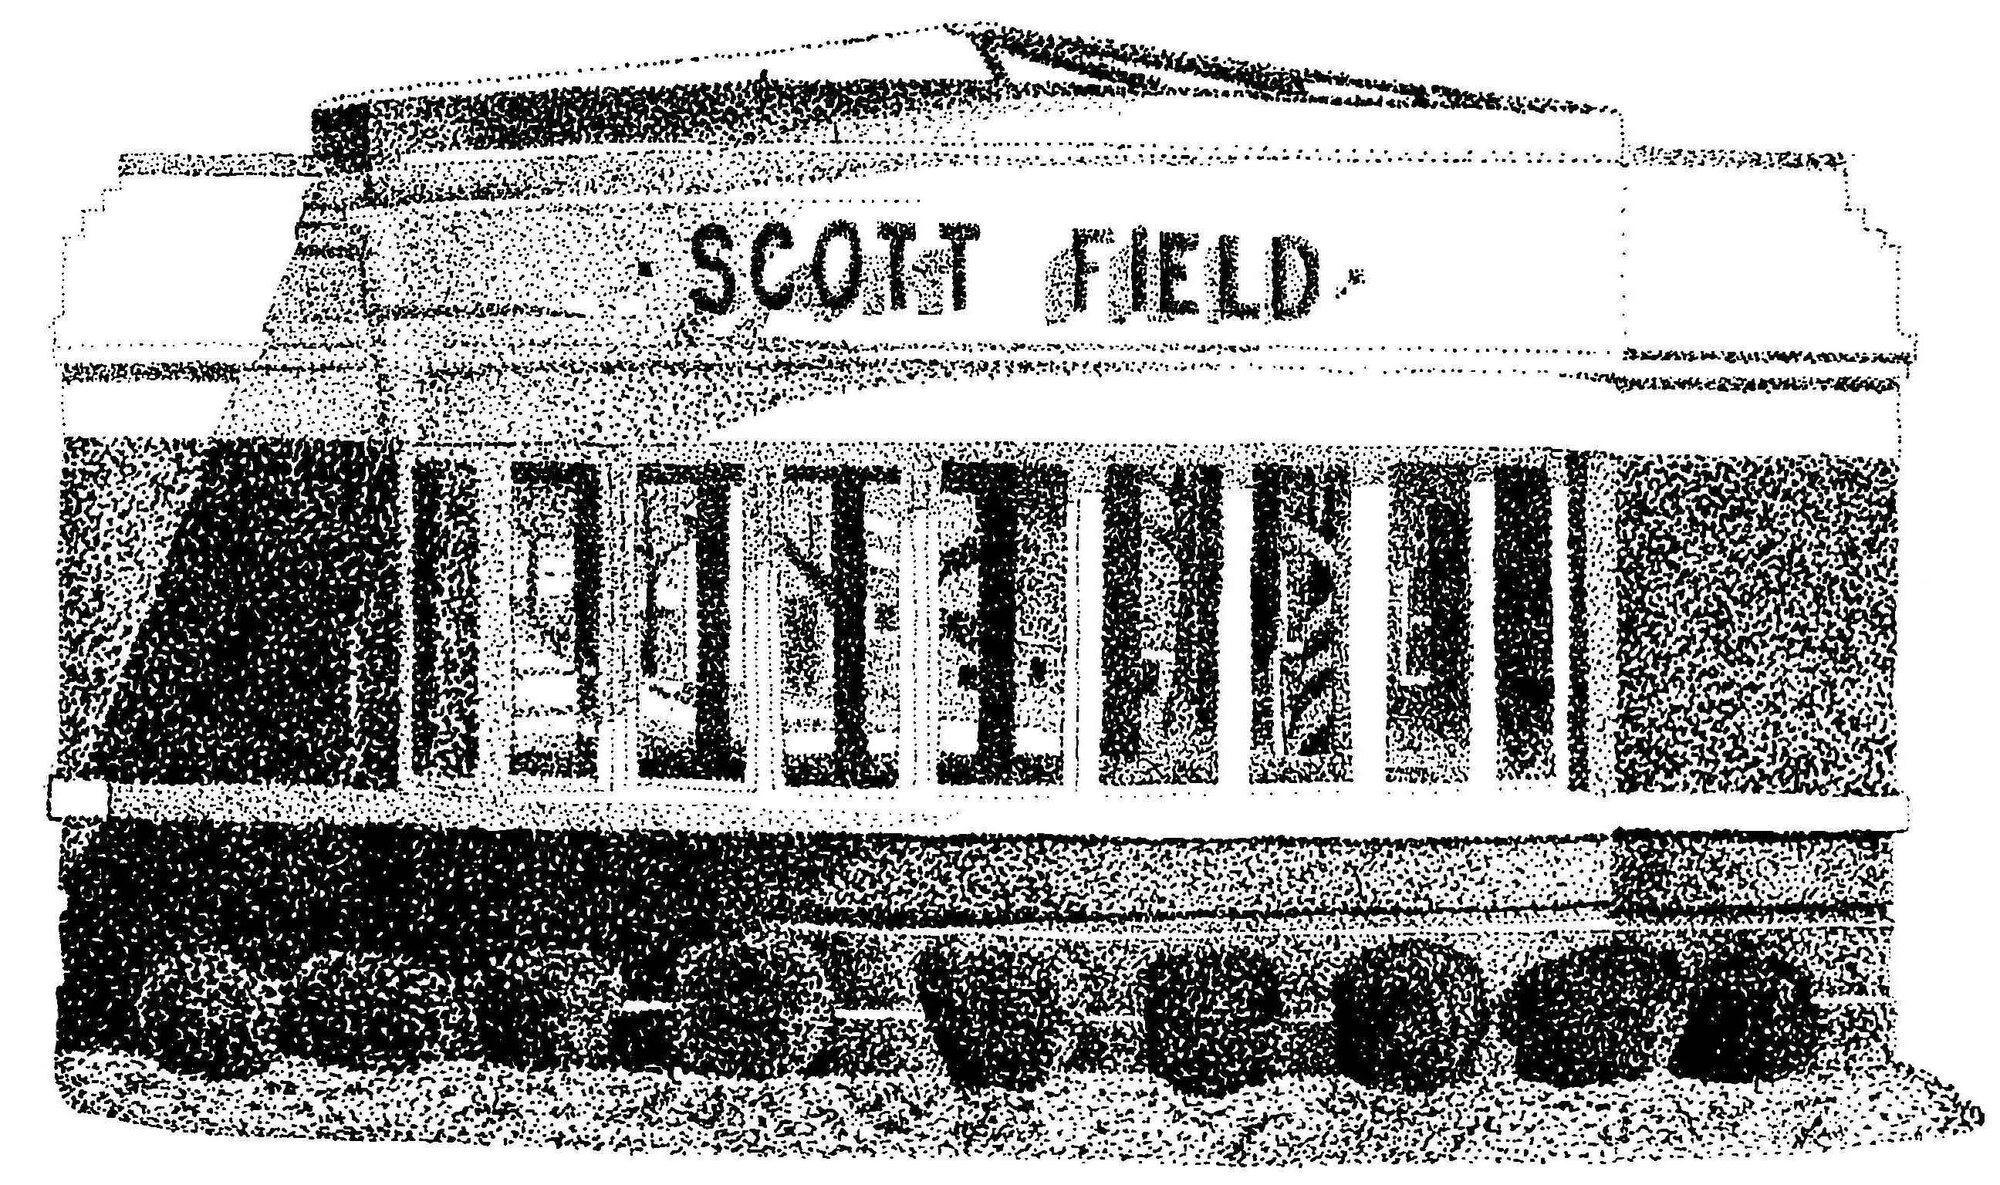 Mr. Zeilman created this pen-and-ink image of the old Scott gate in 1997 for the 50th anniversary of the Air Force.  Mr. Zeilman used an artistic method called stippling to create the illusion of texture.